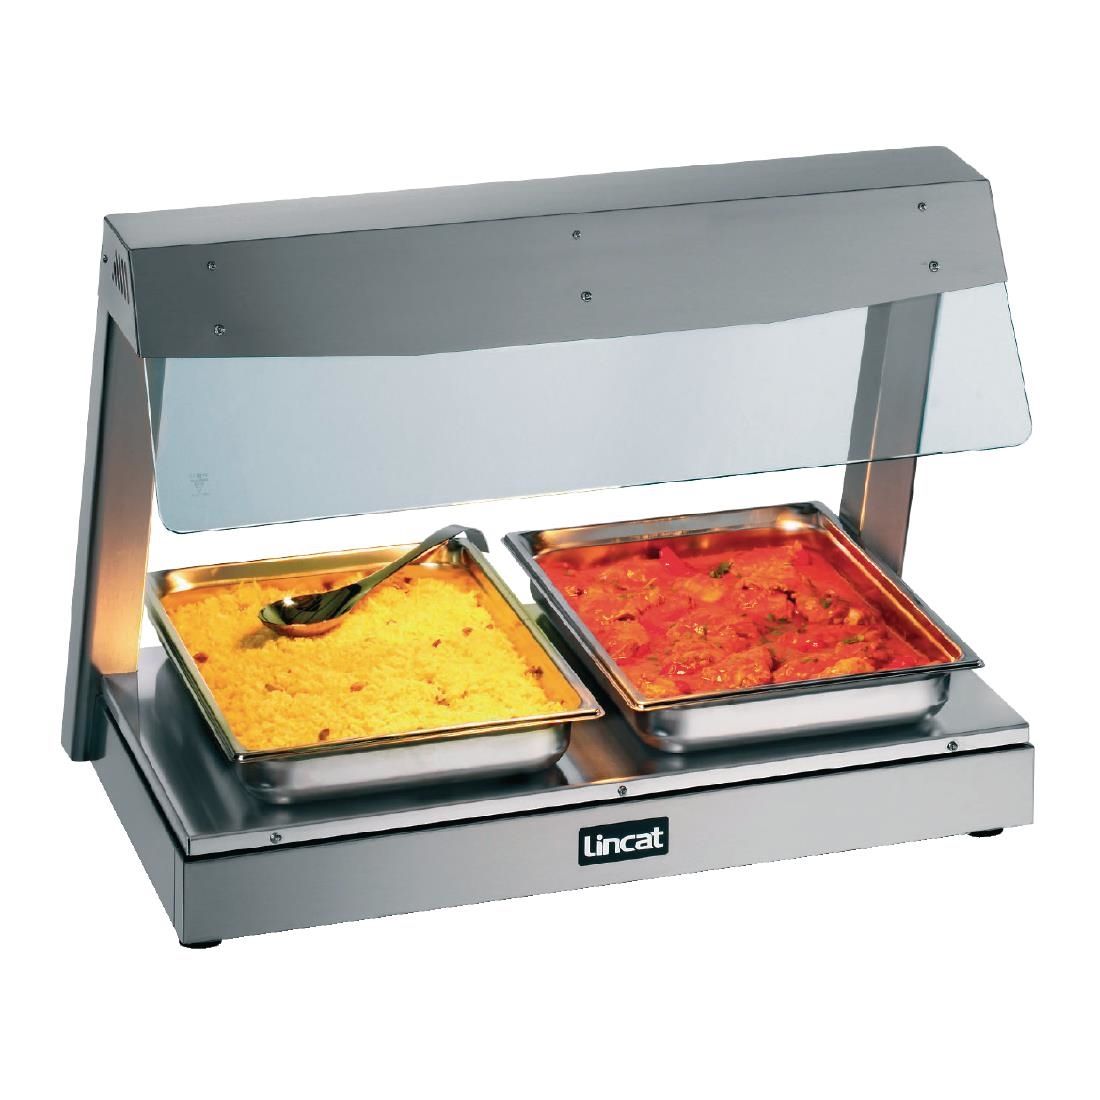 LD2 - Lincat Seal Counter-top Heated Display with Gantry - 2 x 1/1 GN - W 790 mm - 1.5 kW J945 JD Catering Equipment Solutions Ltd